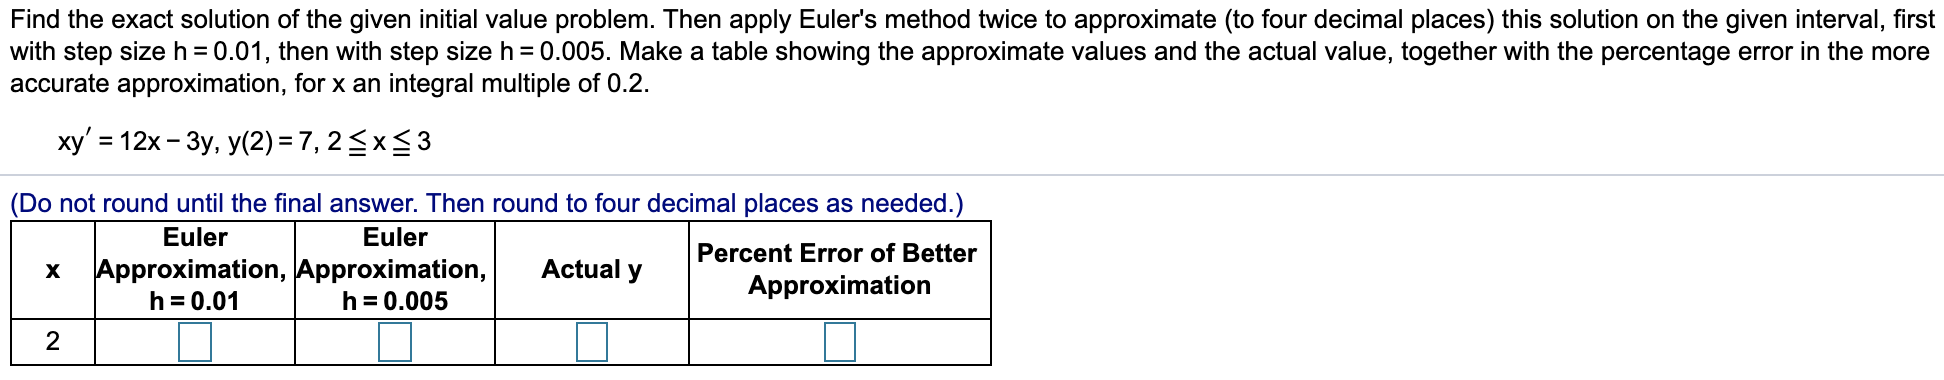 Make a table showing the approximate values and the actual value, together with the percentage error
